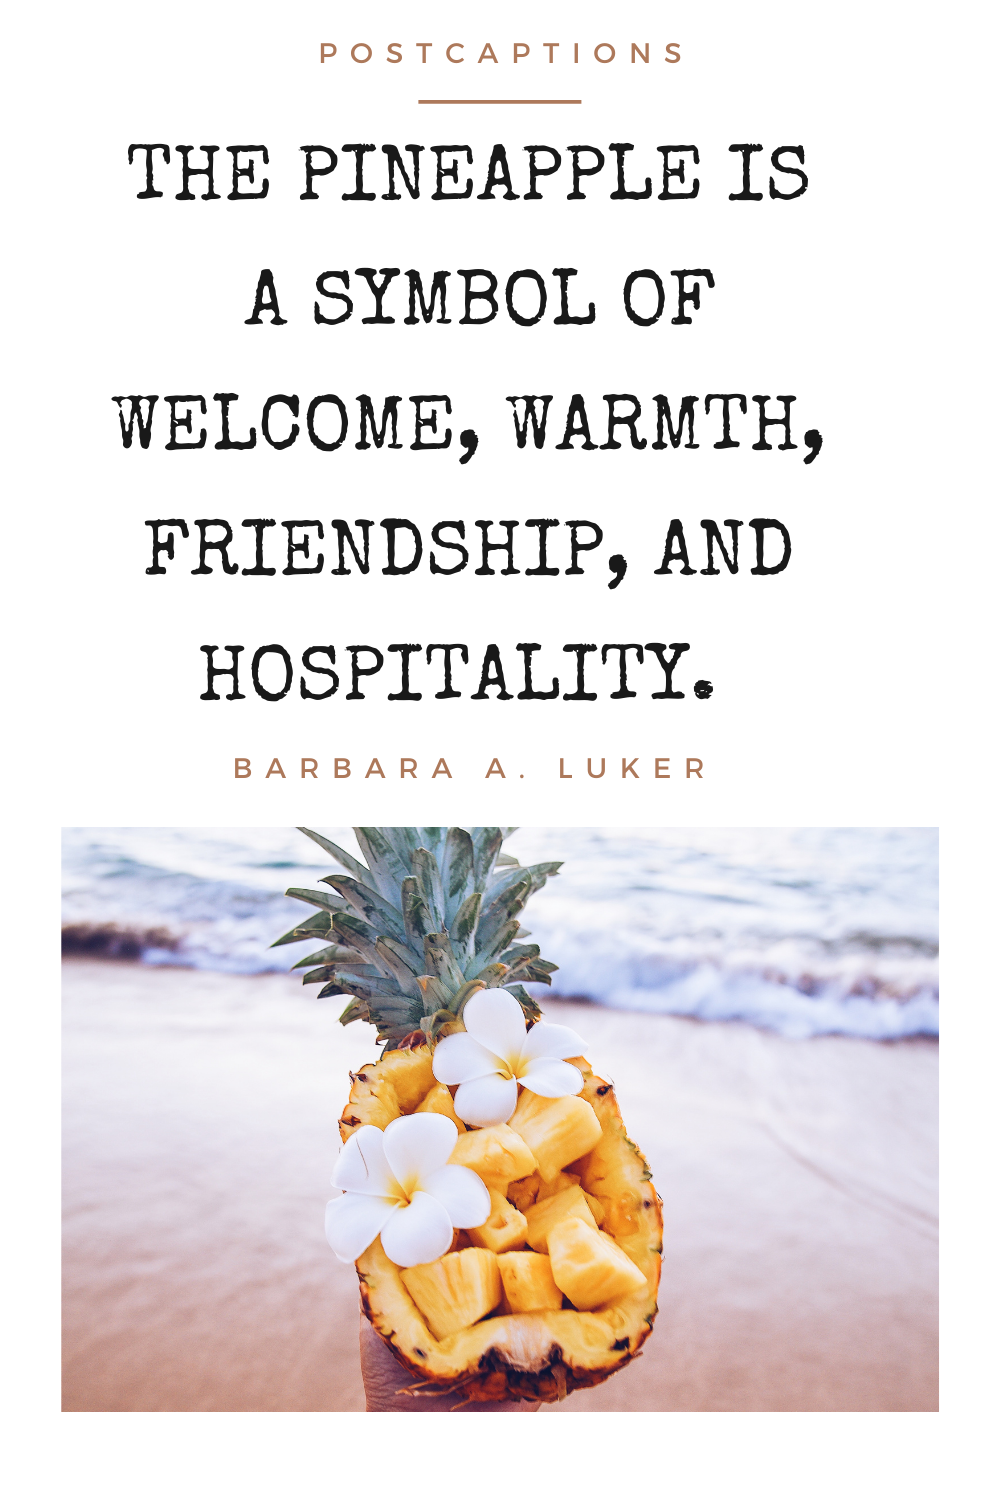 Pineapple quotes for Instagram